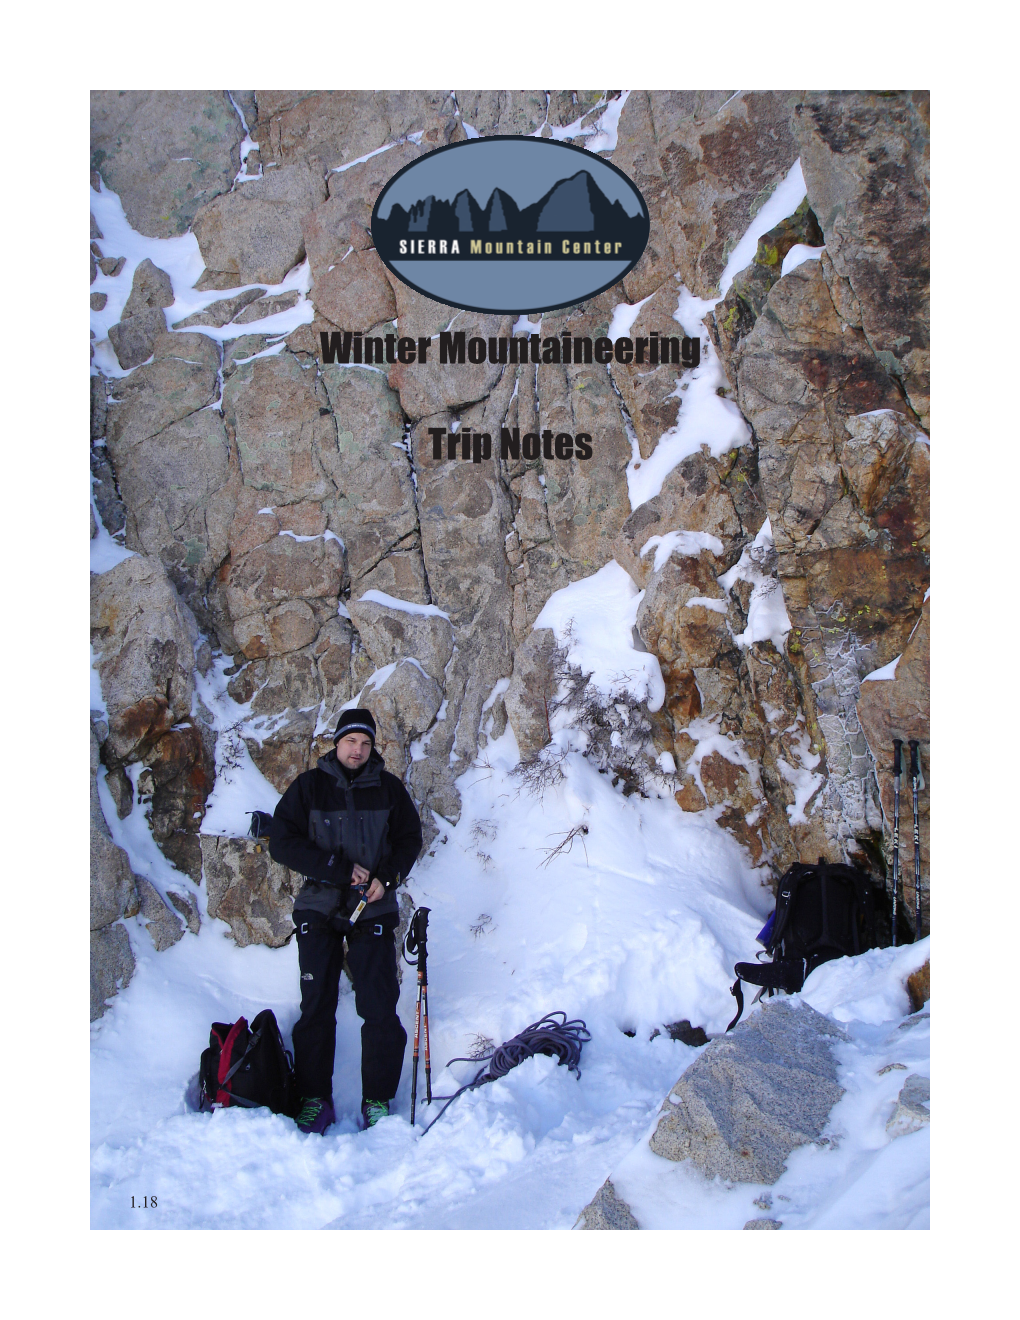 Winter Mountaineering Trip Notes